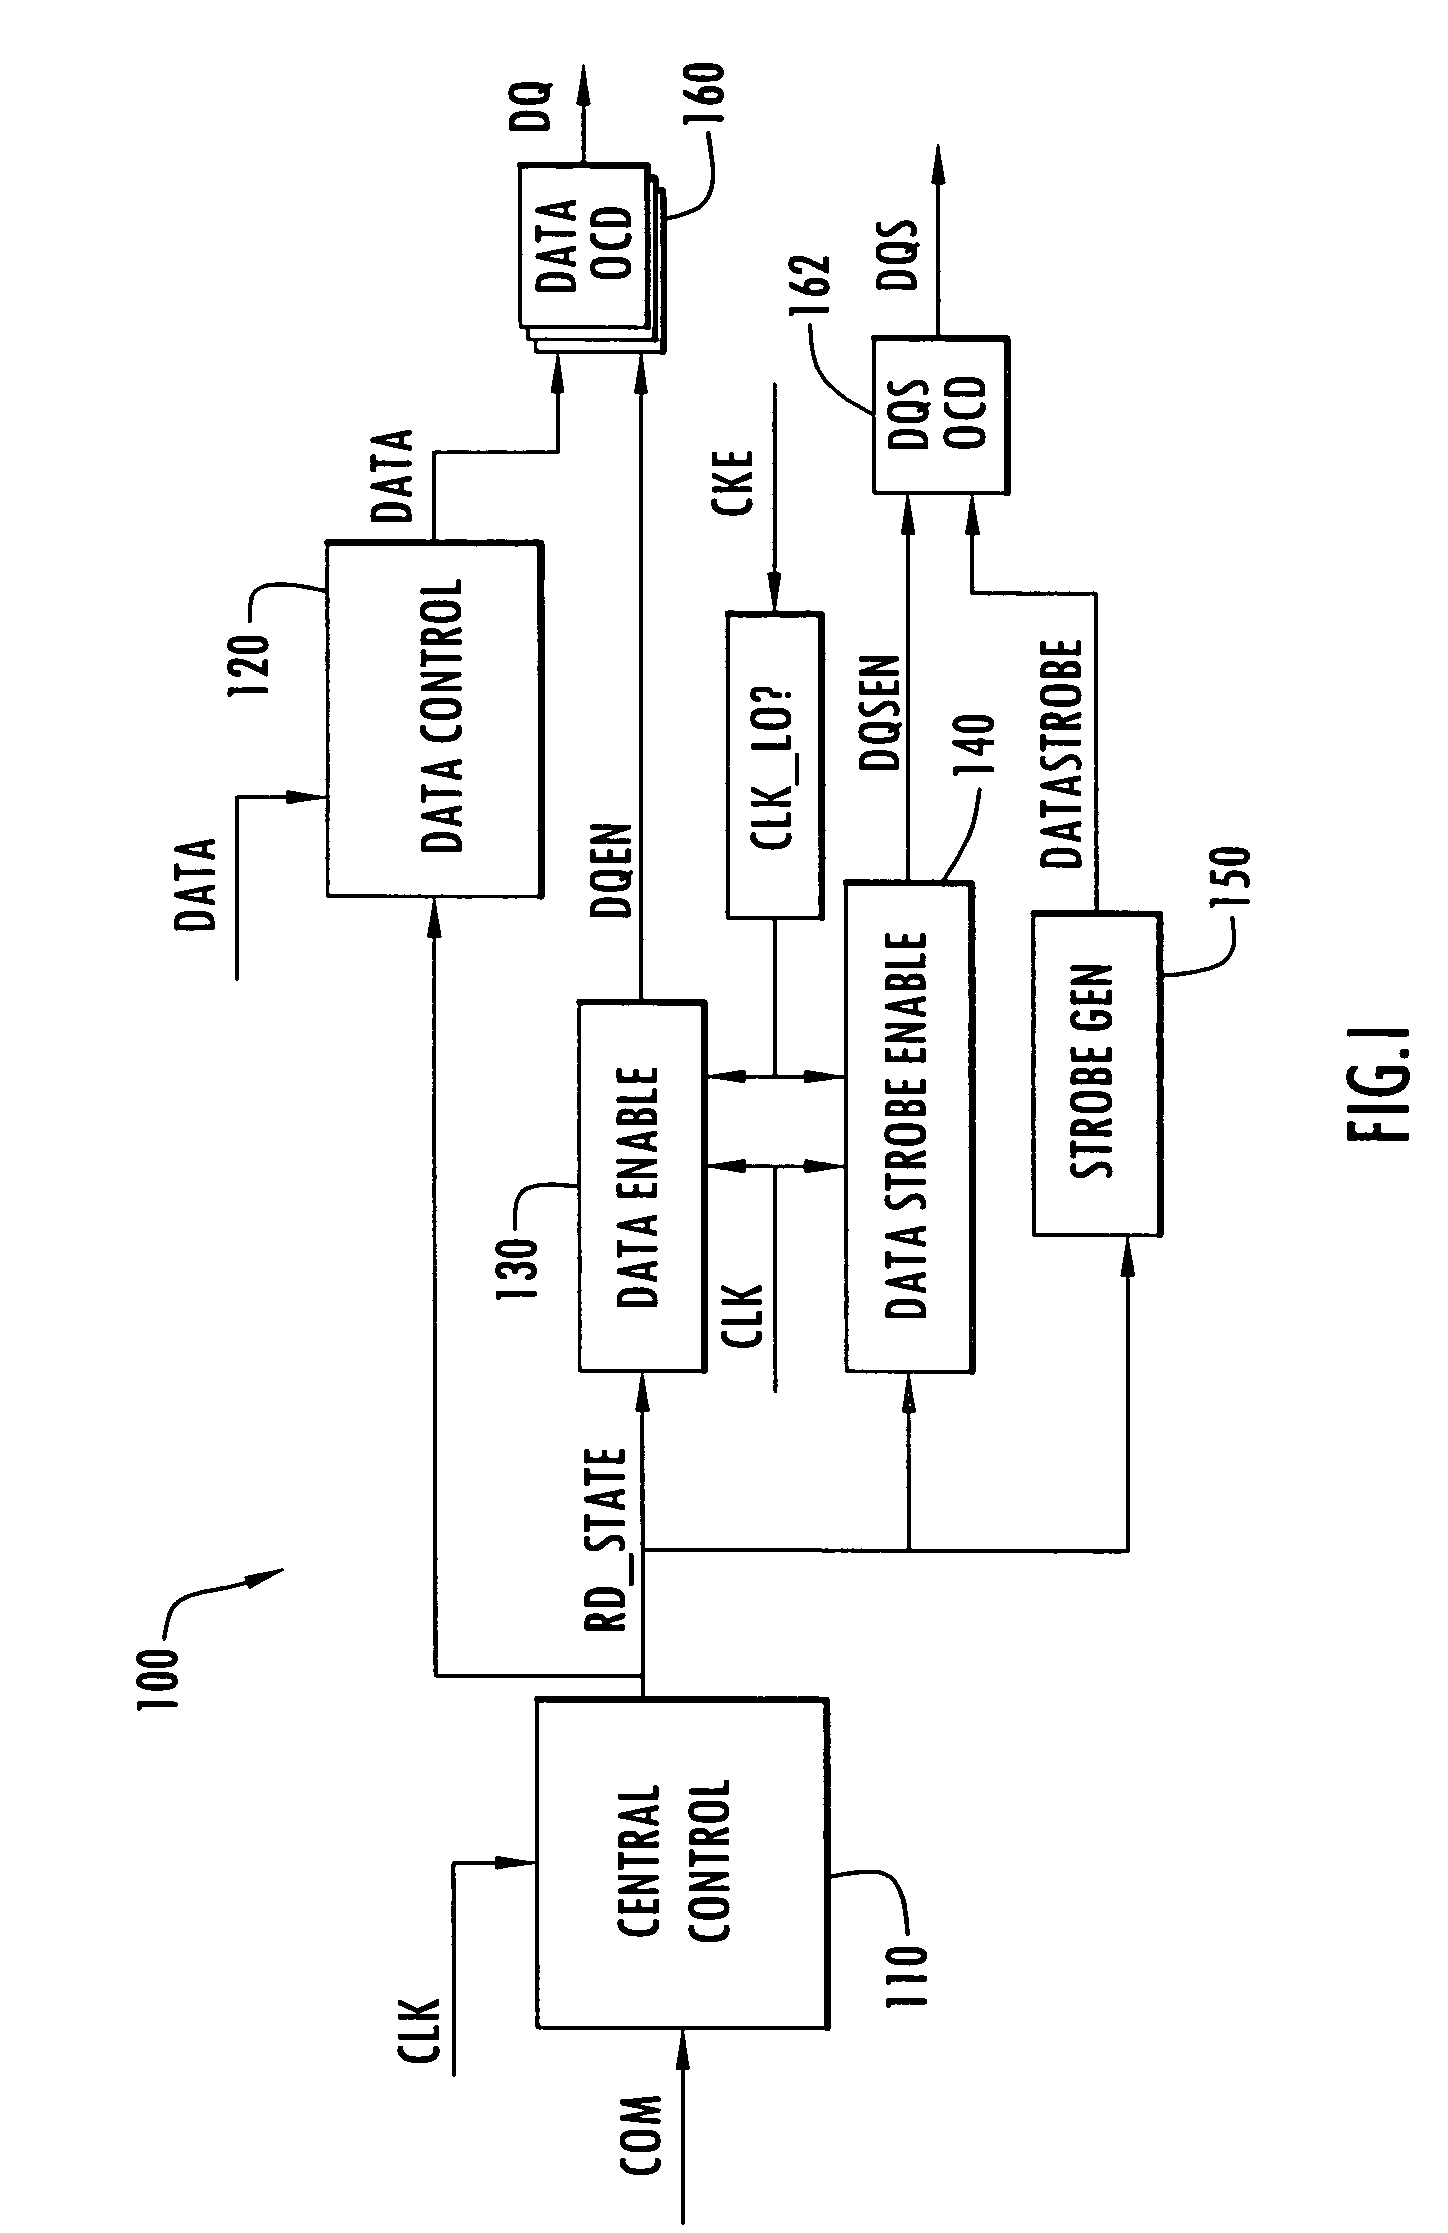 Methods and apparatus for implementing a power down in a memory device